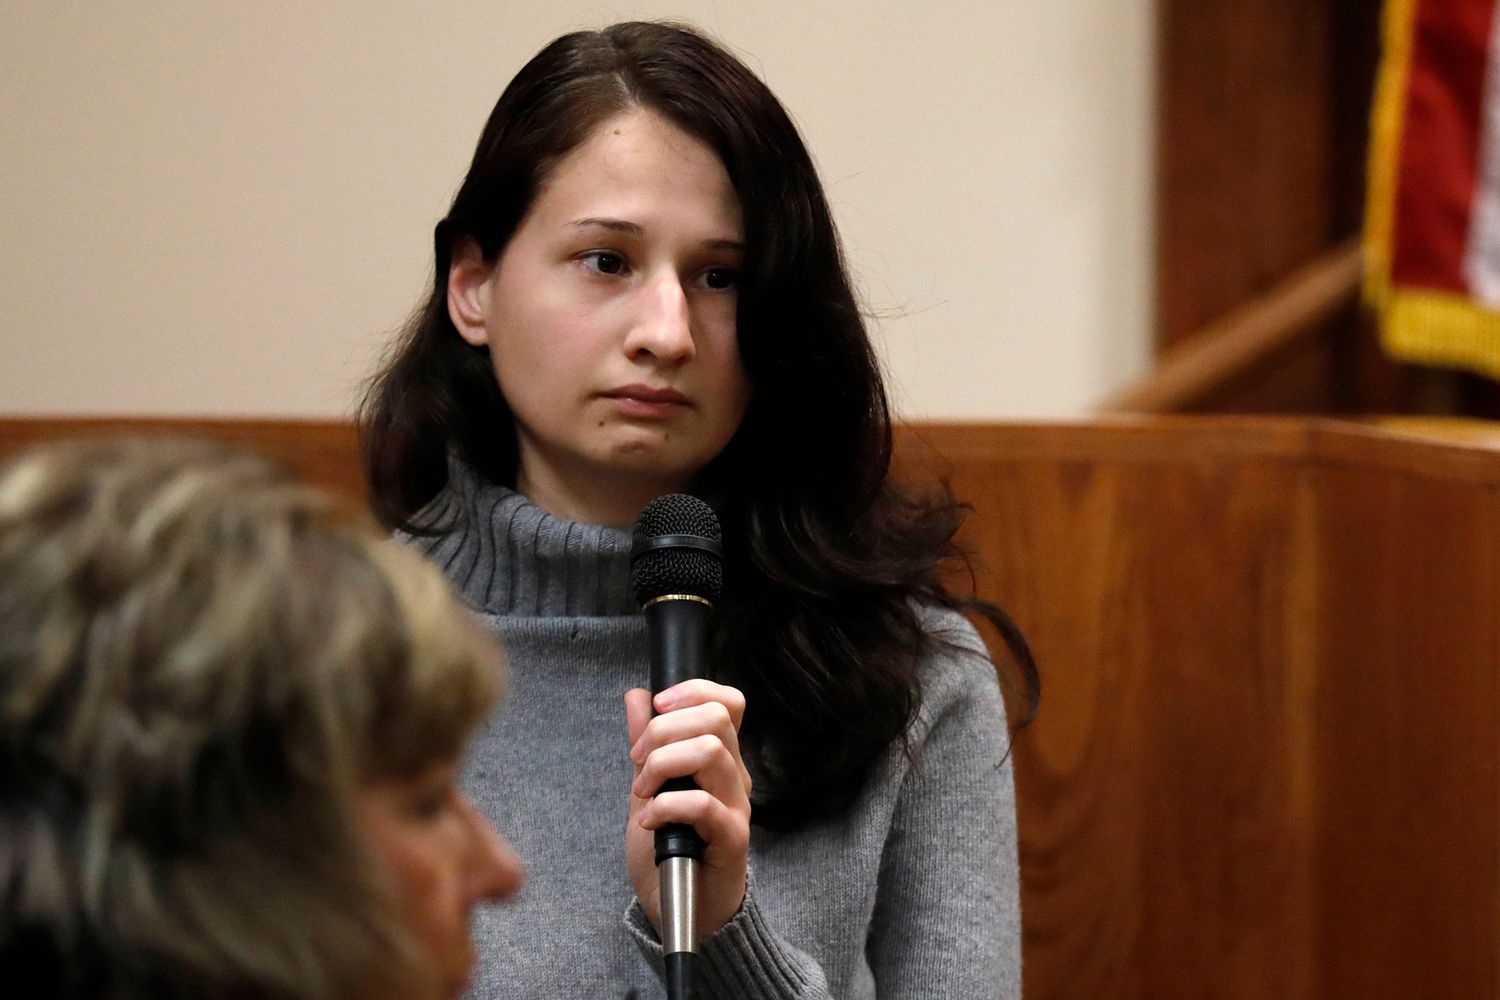 Gypsy Rose Blanchard Released From Prison: A New Beginning